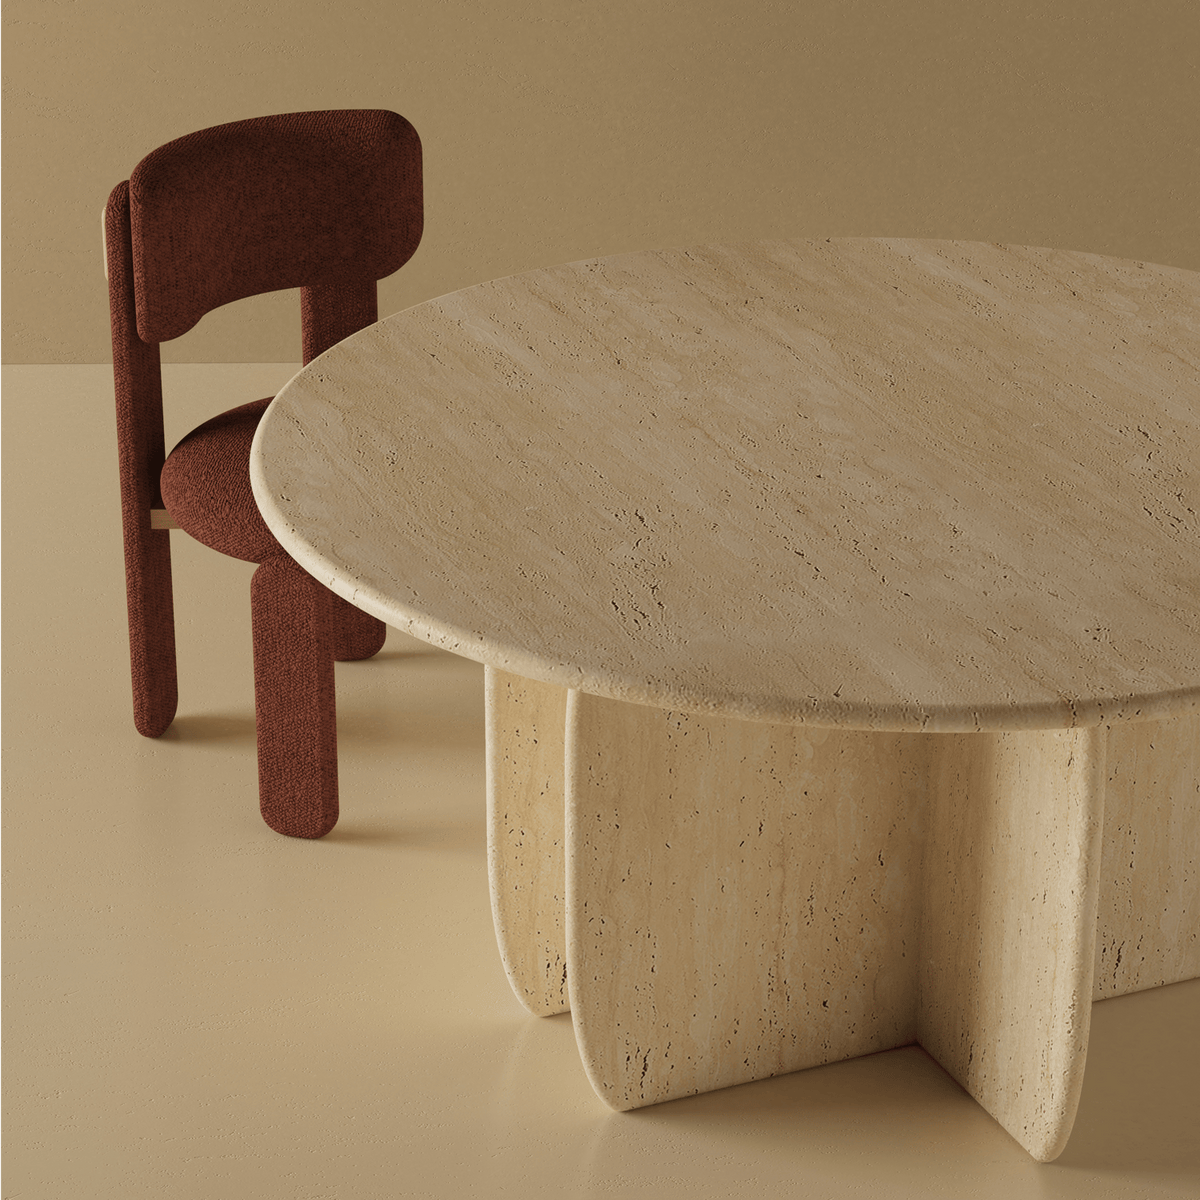 Catus Dining Table-Mambo-Contract Furniture Store